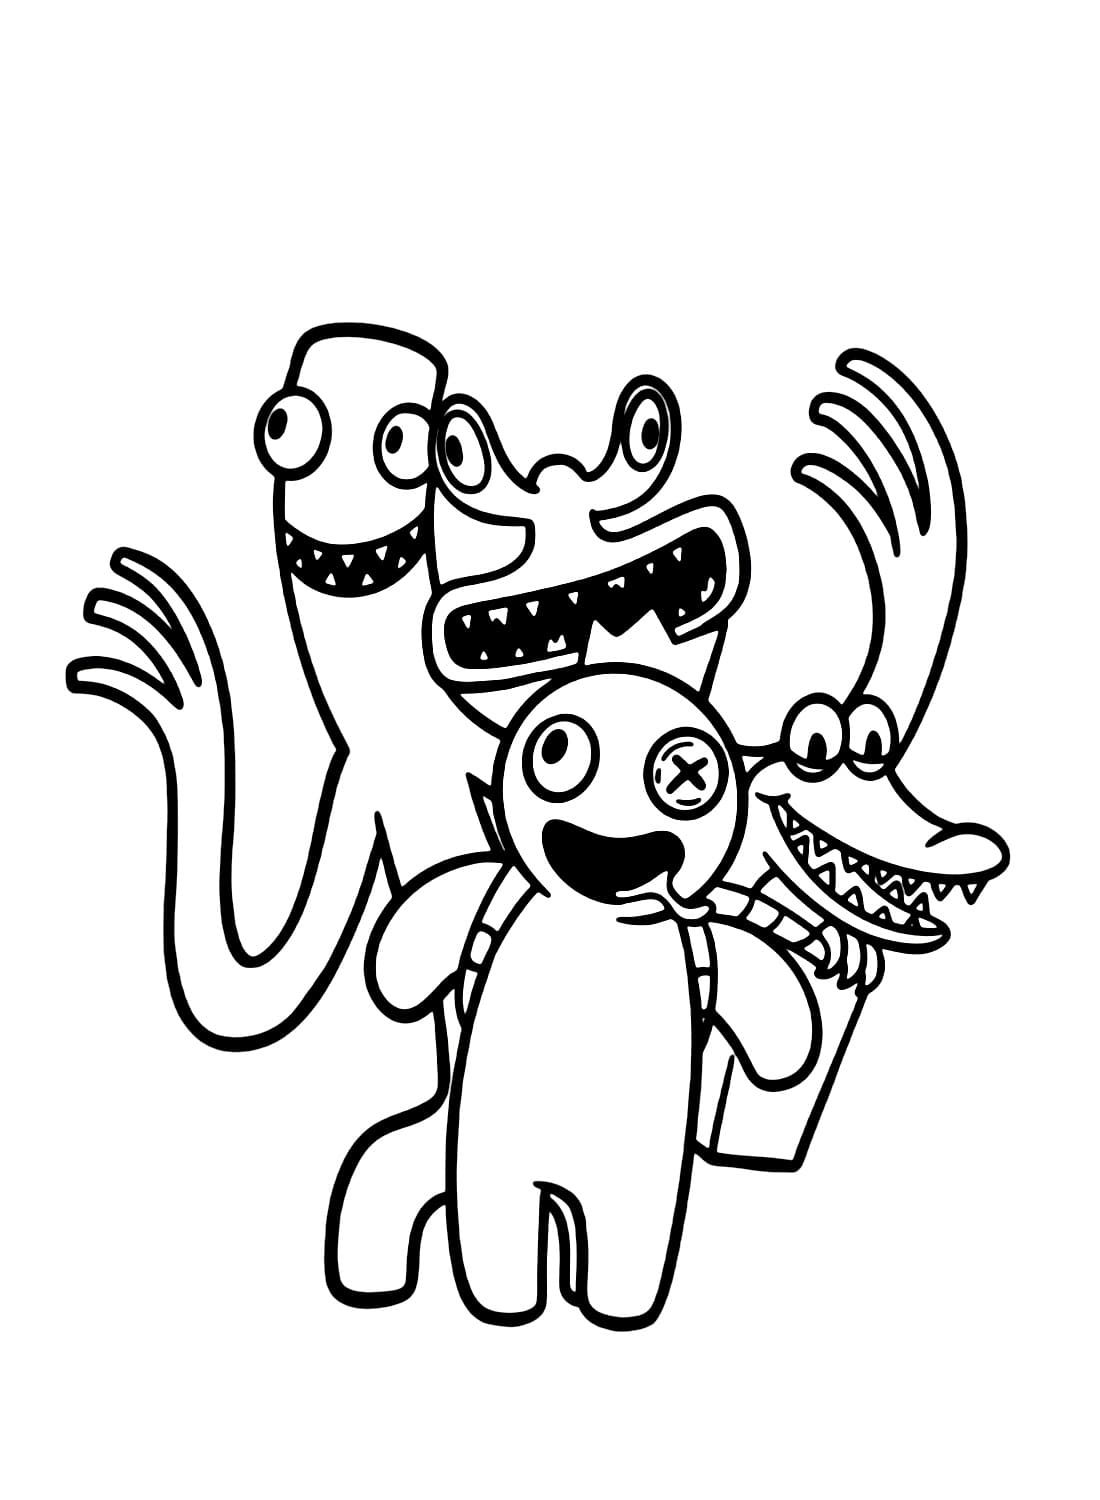 Rainbow Friends Characters coloring page - Download, Print or Color ...